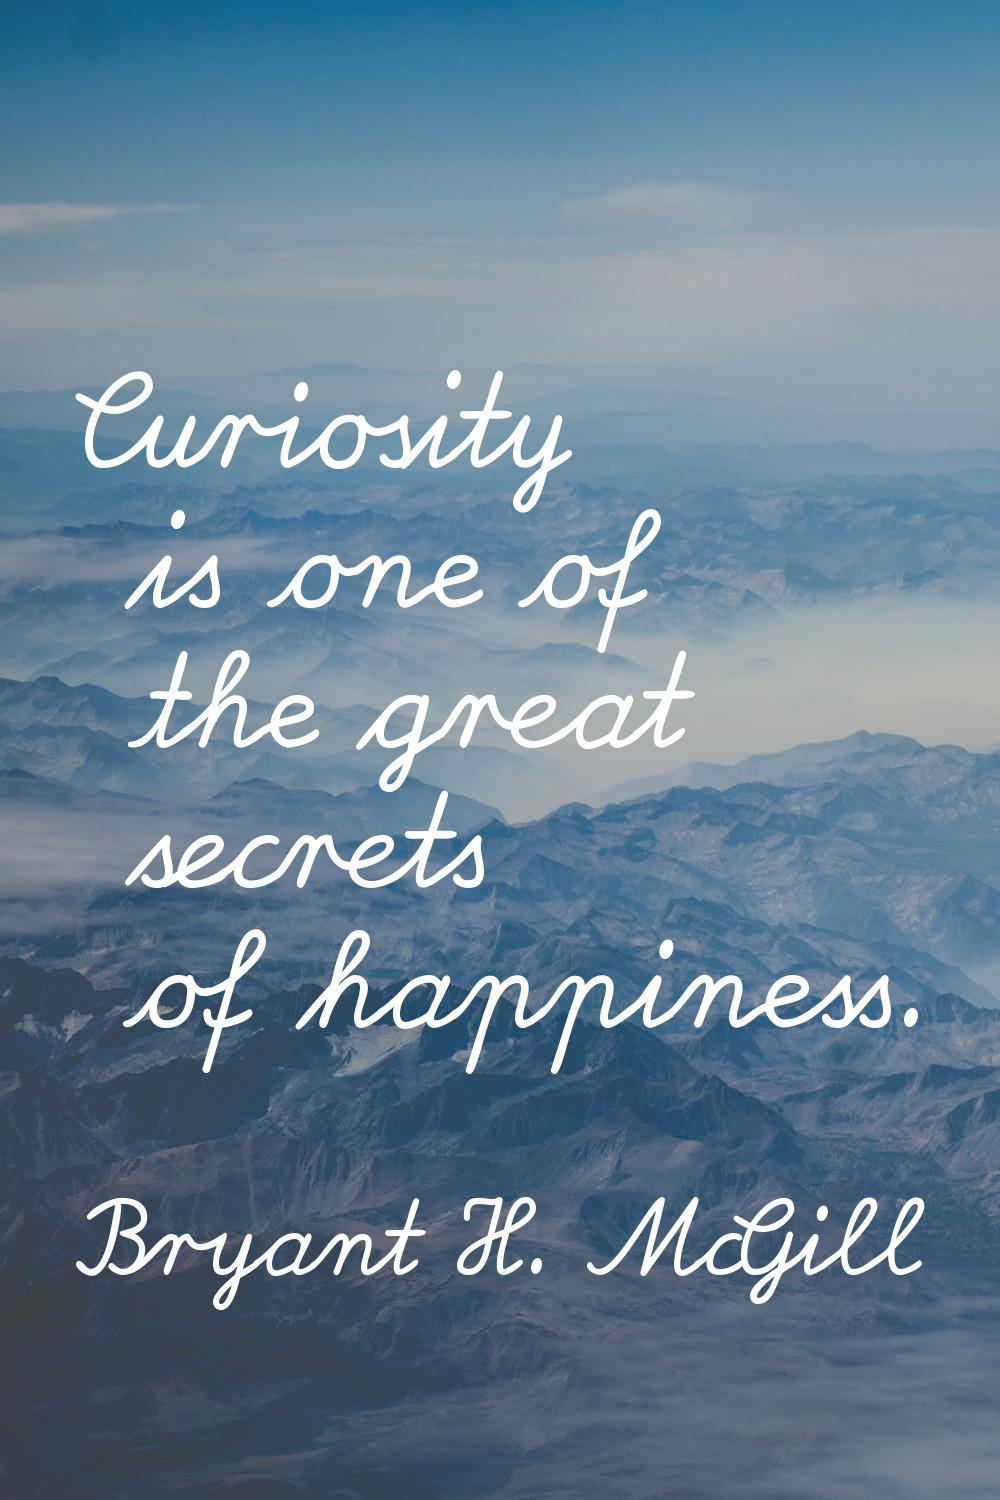 Curiosity is one of the great secrets of happiness.